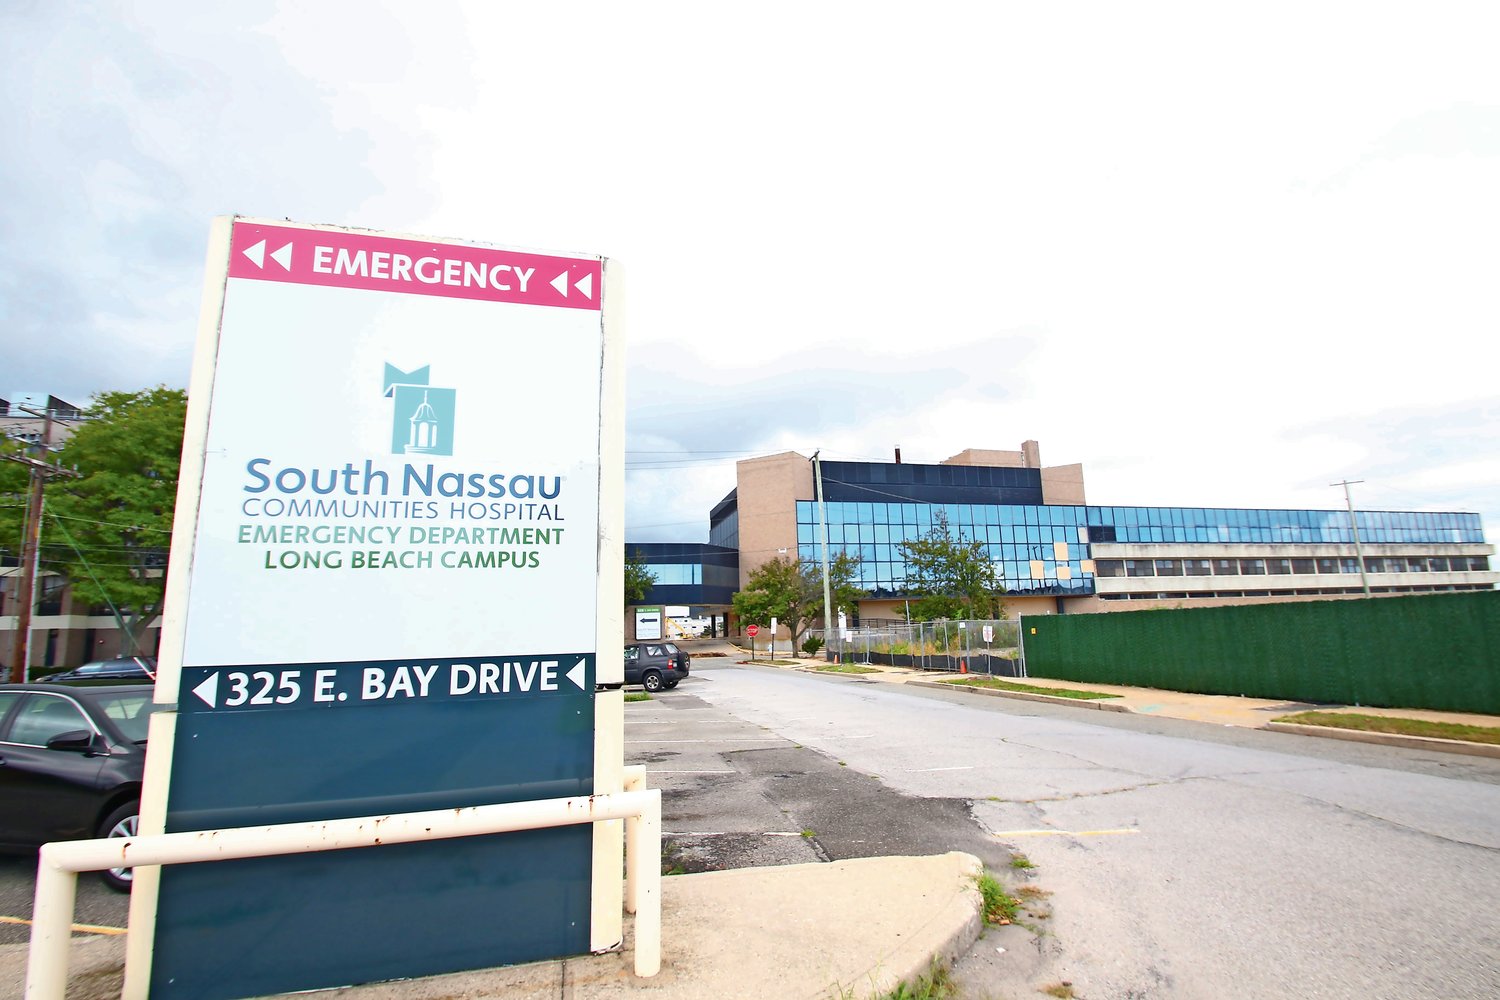 South Nassau Communities Hospital originally planned to build a medical pavilion and emergency department in what remains of the Long Beach Medical Center’s main and west wings, pictured. It now intends to construct a medical pavilion elsewhere on the property, and continue to operate an emergency department, which opened in 2015 and was initially intended to be temporary.